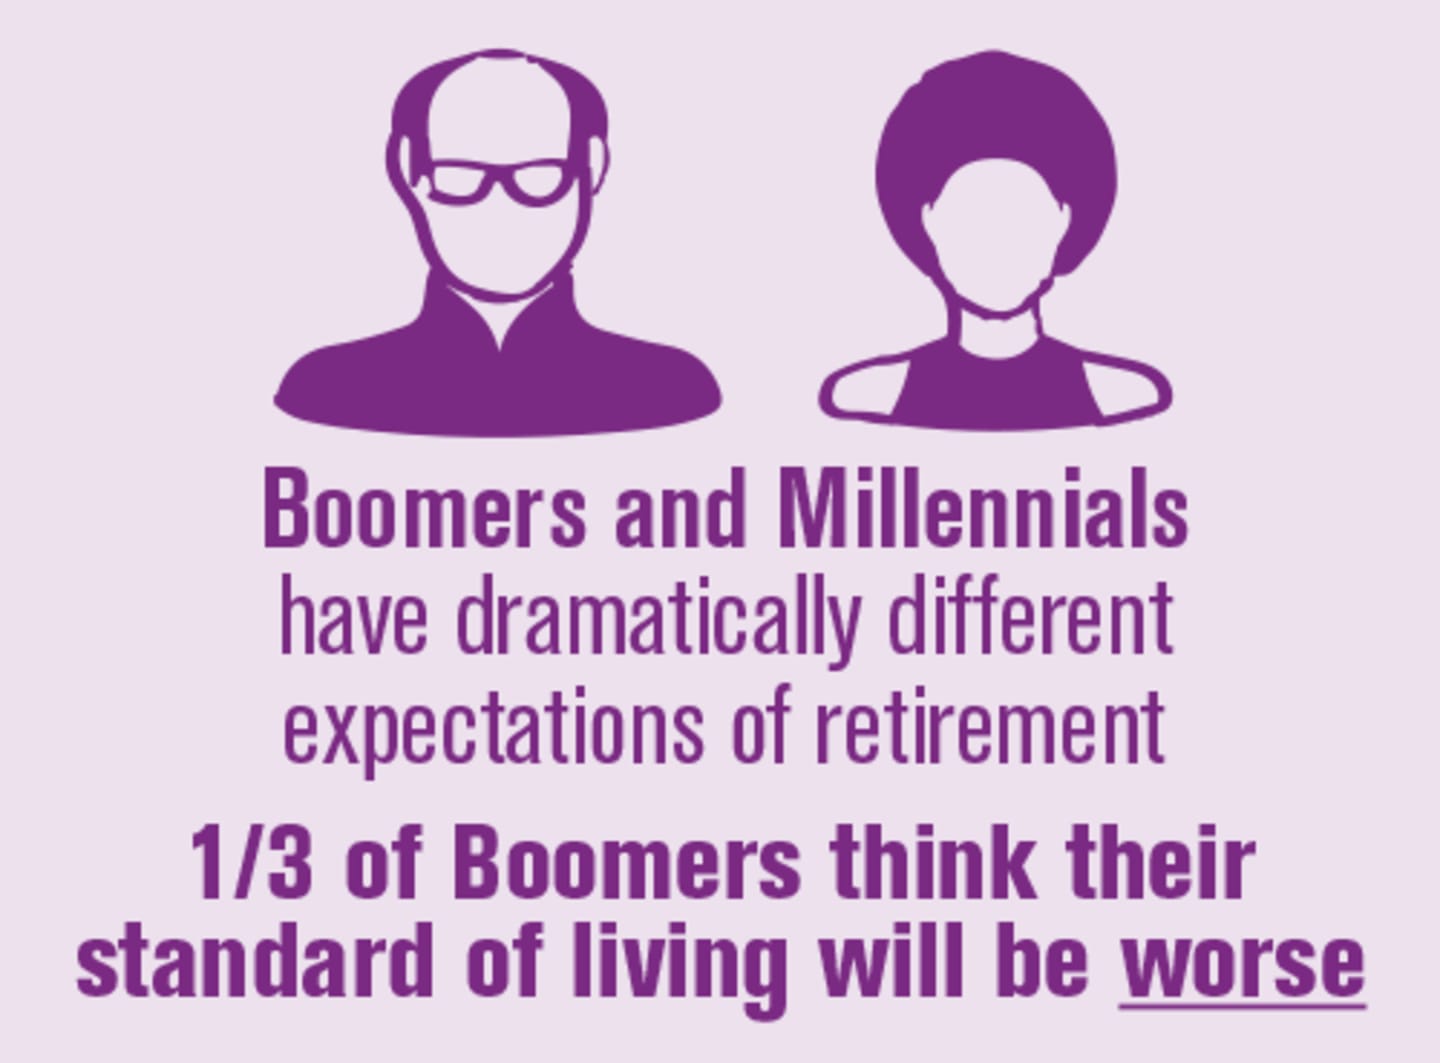 Boomers and Millennials have dramatically different expectations of retirement.